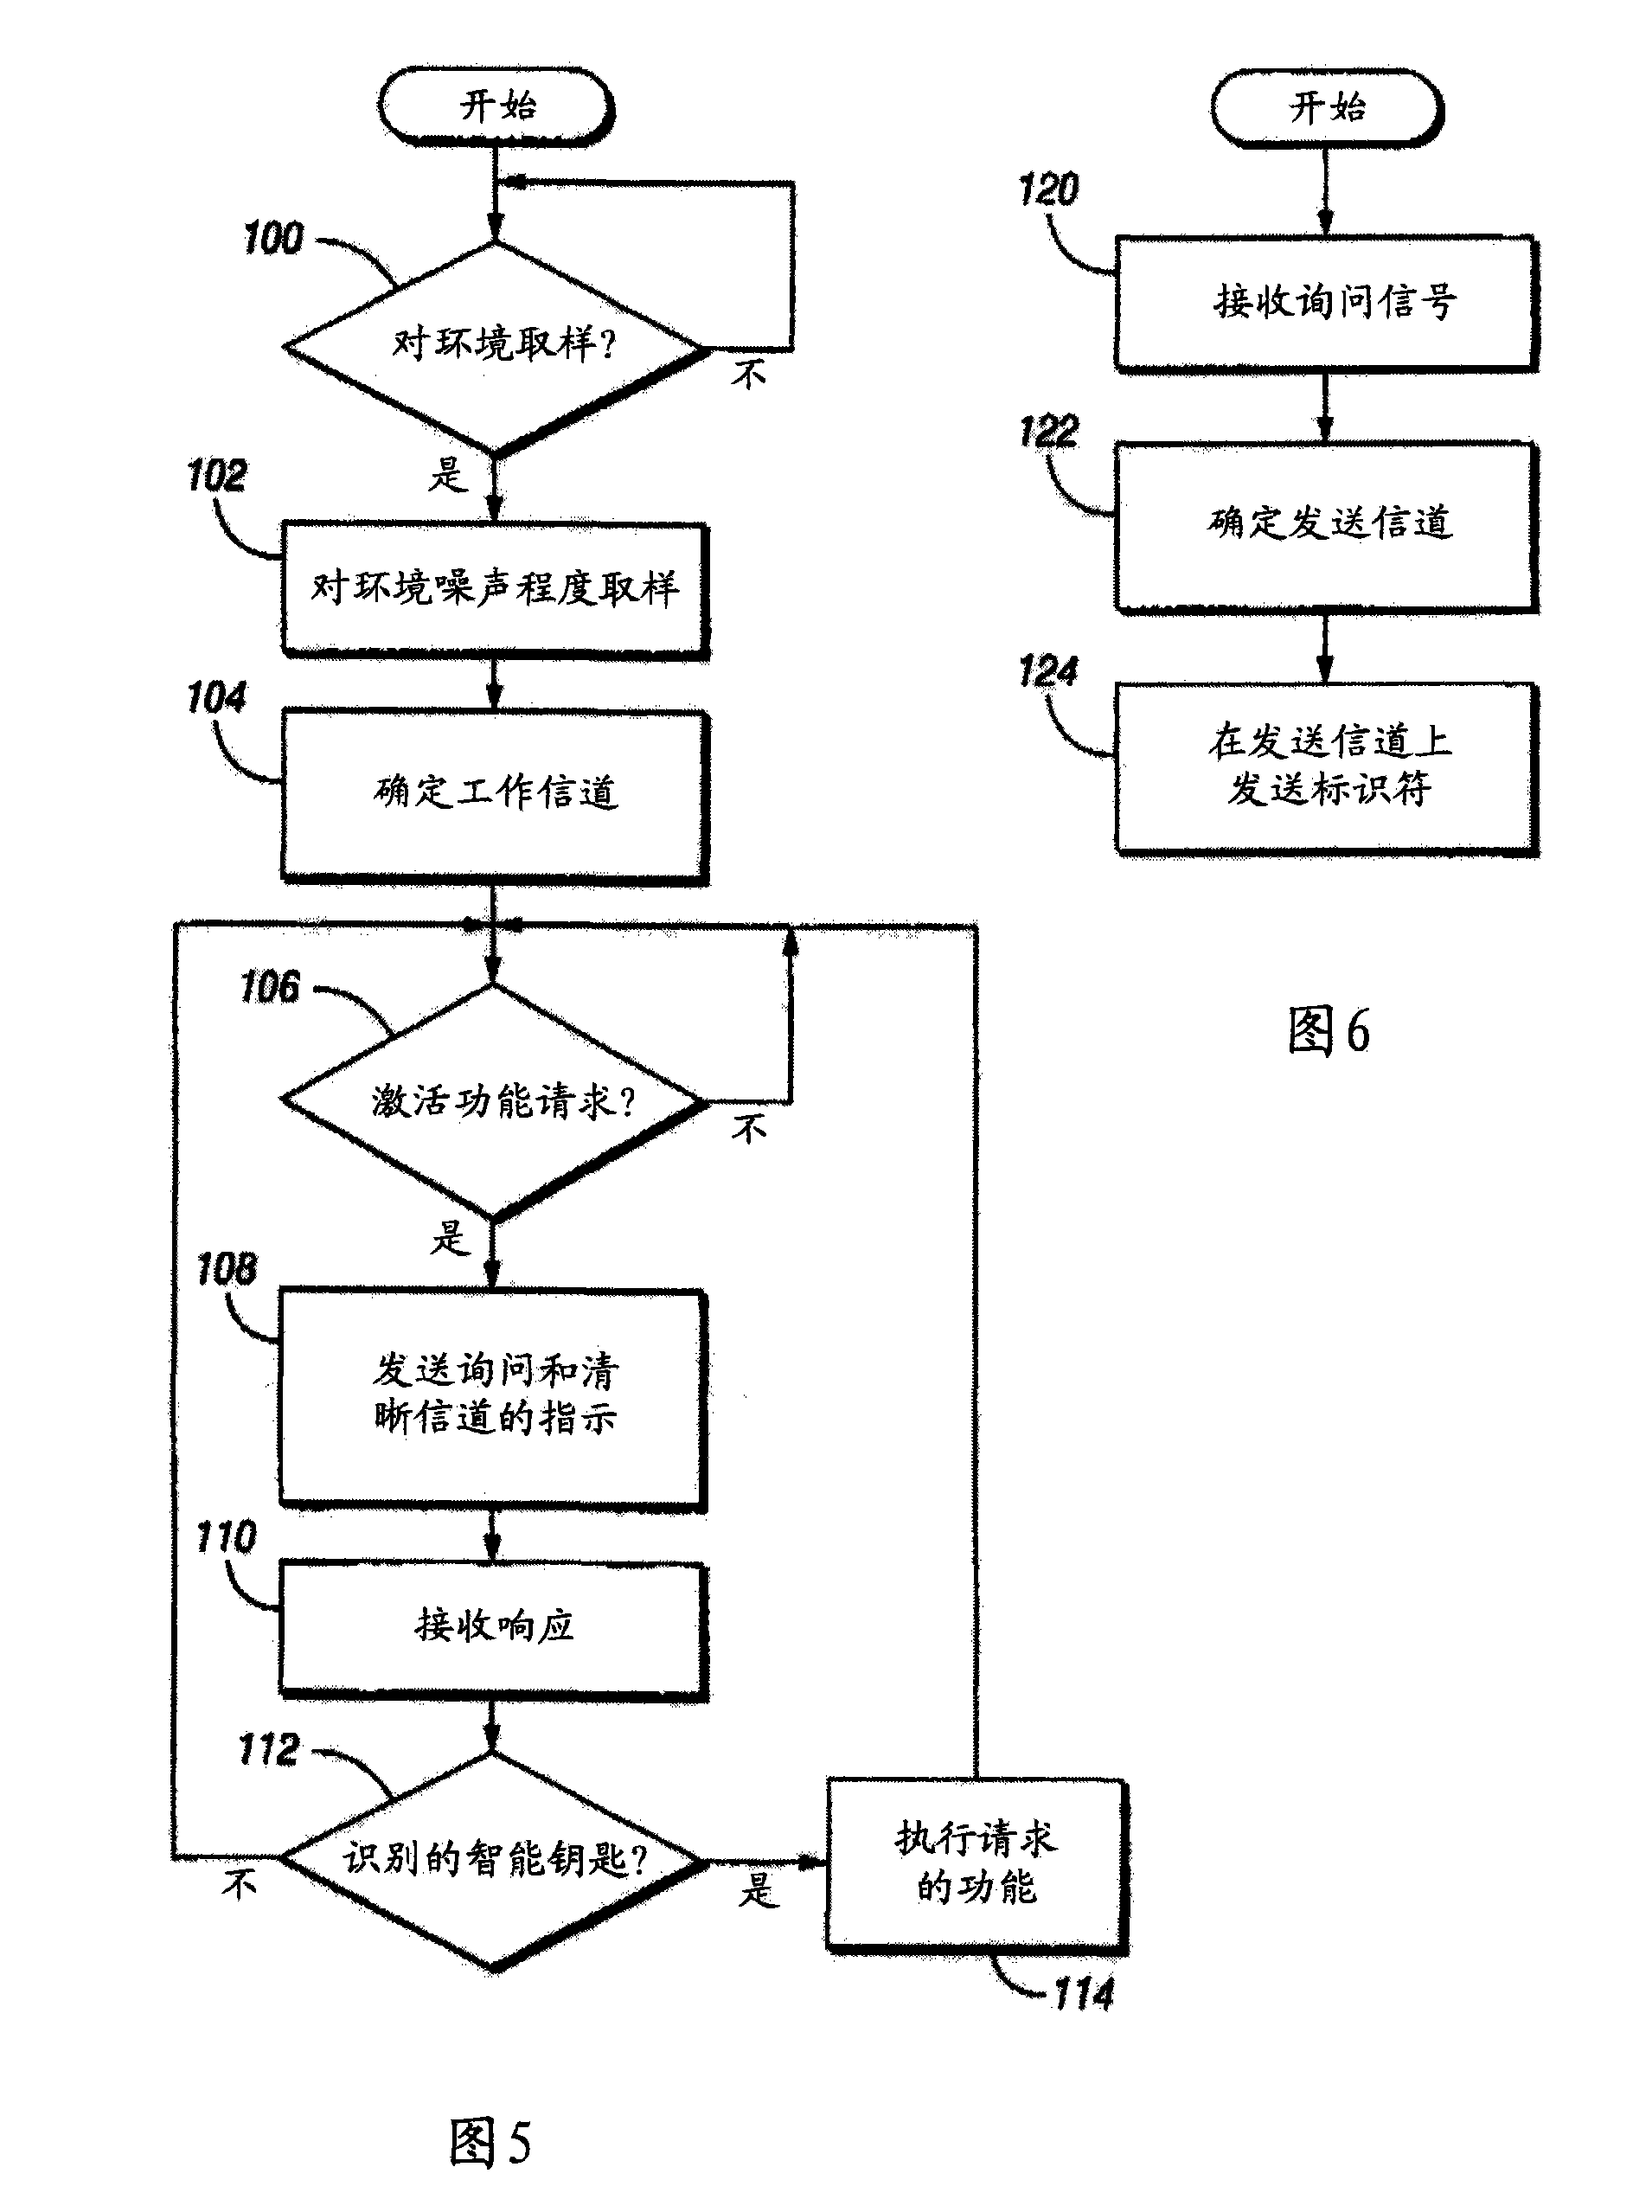 Frequency selection in system for remote activation of vehicle functions